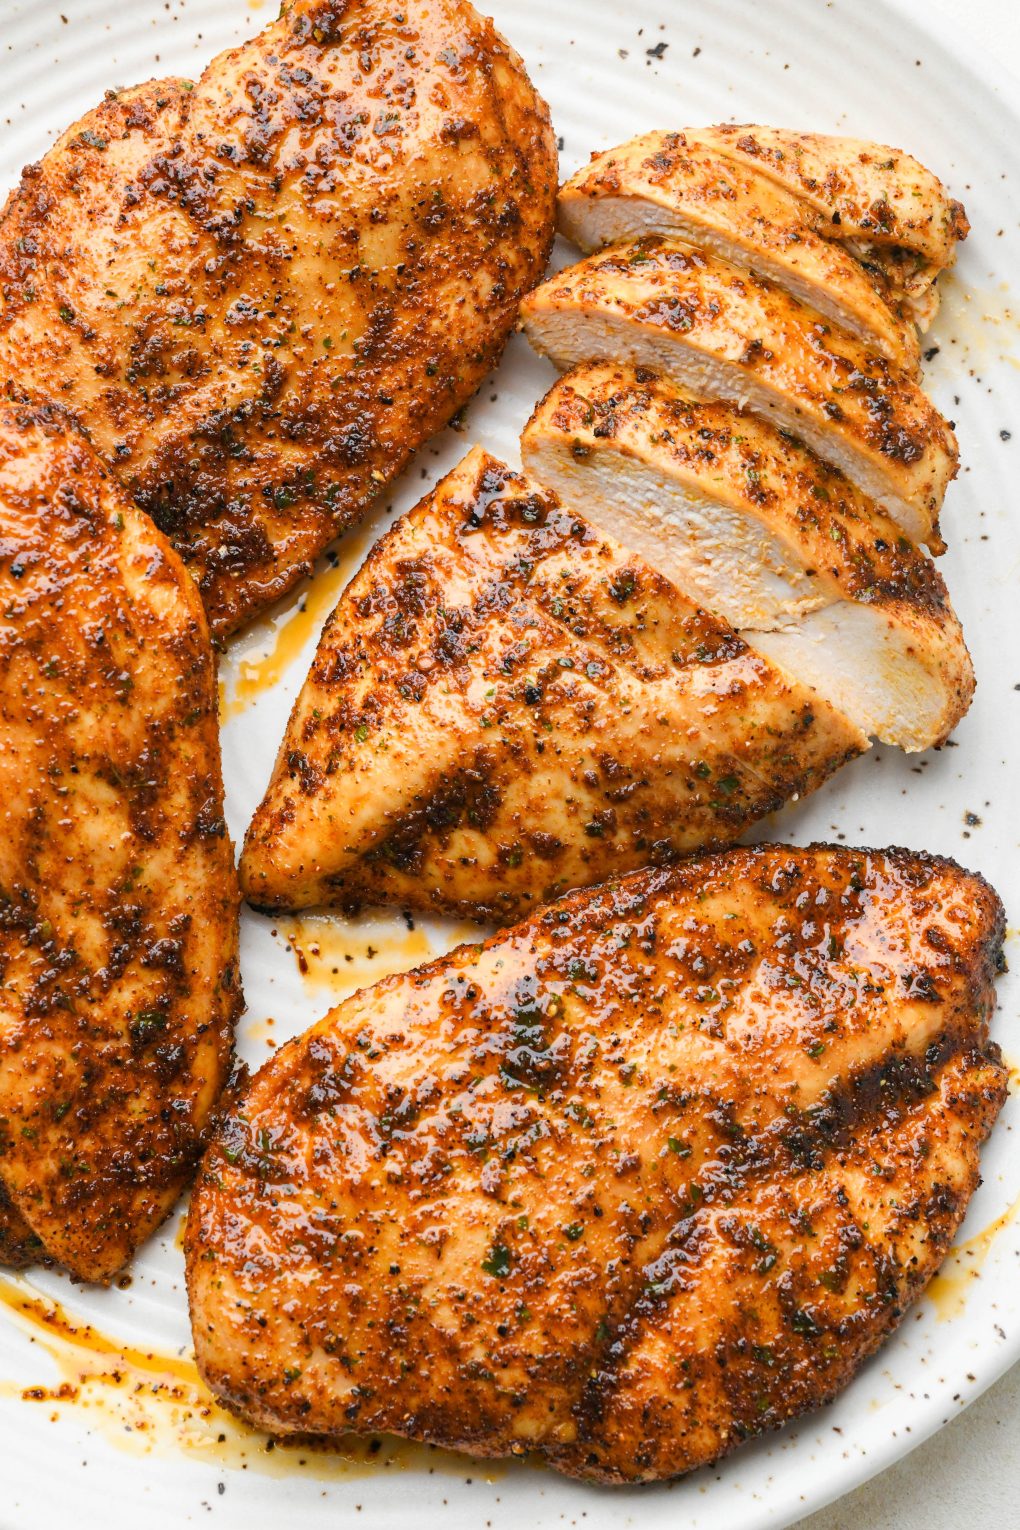 Four oven baked chicken breasts on a large speckled platter, one breast sliced into strips with the juicy interior showing. 